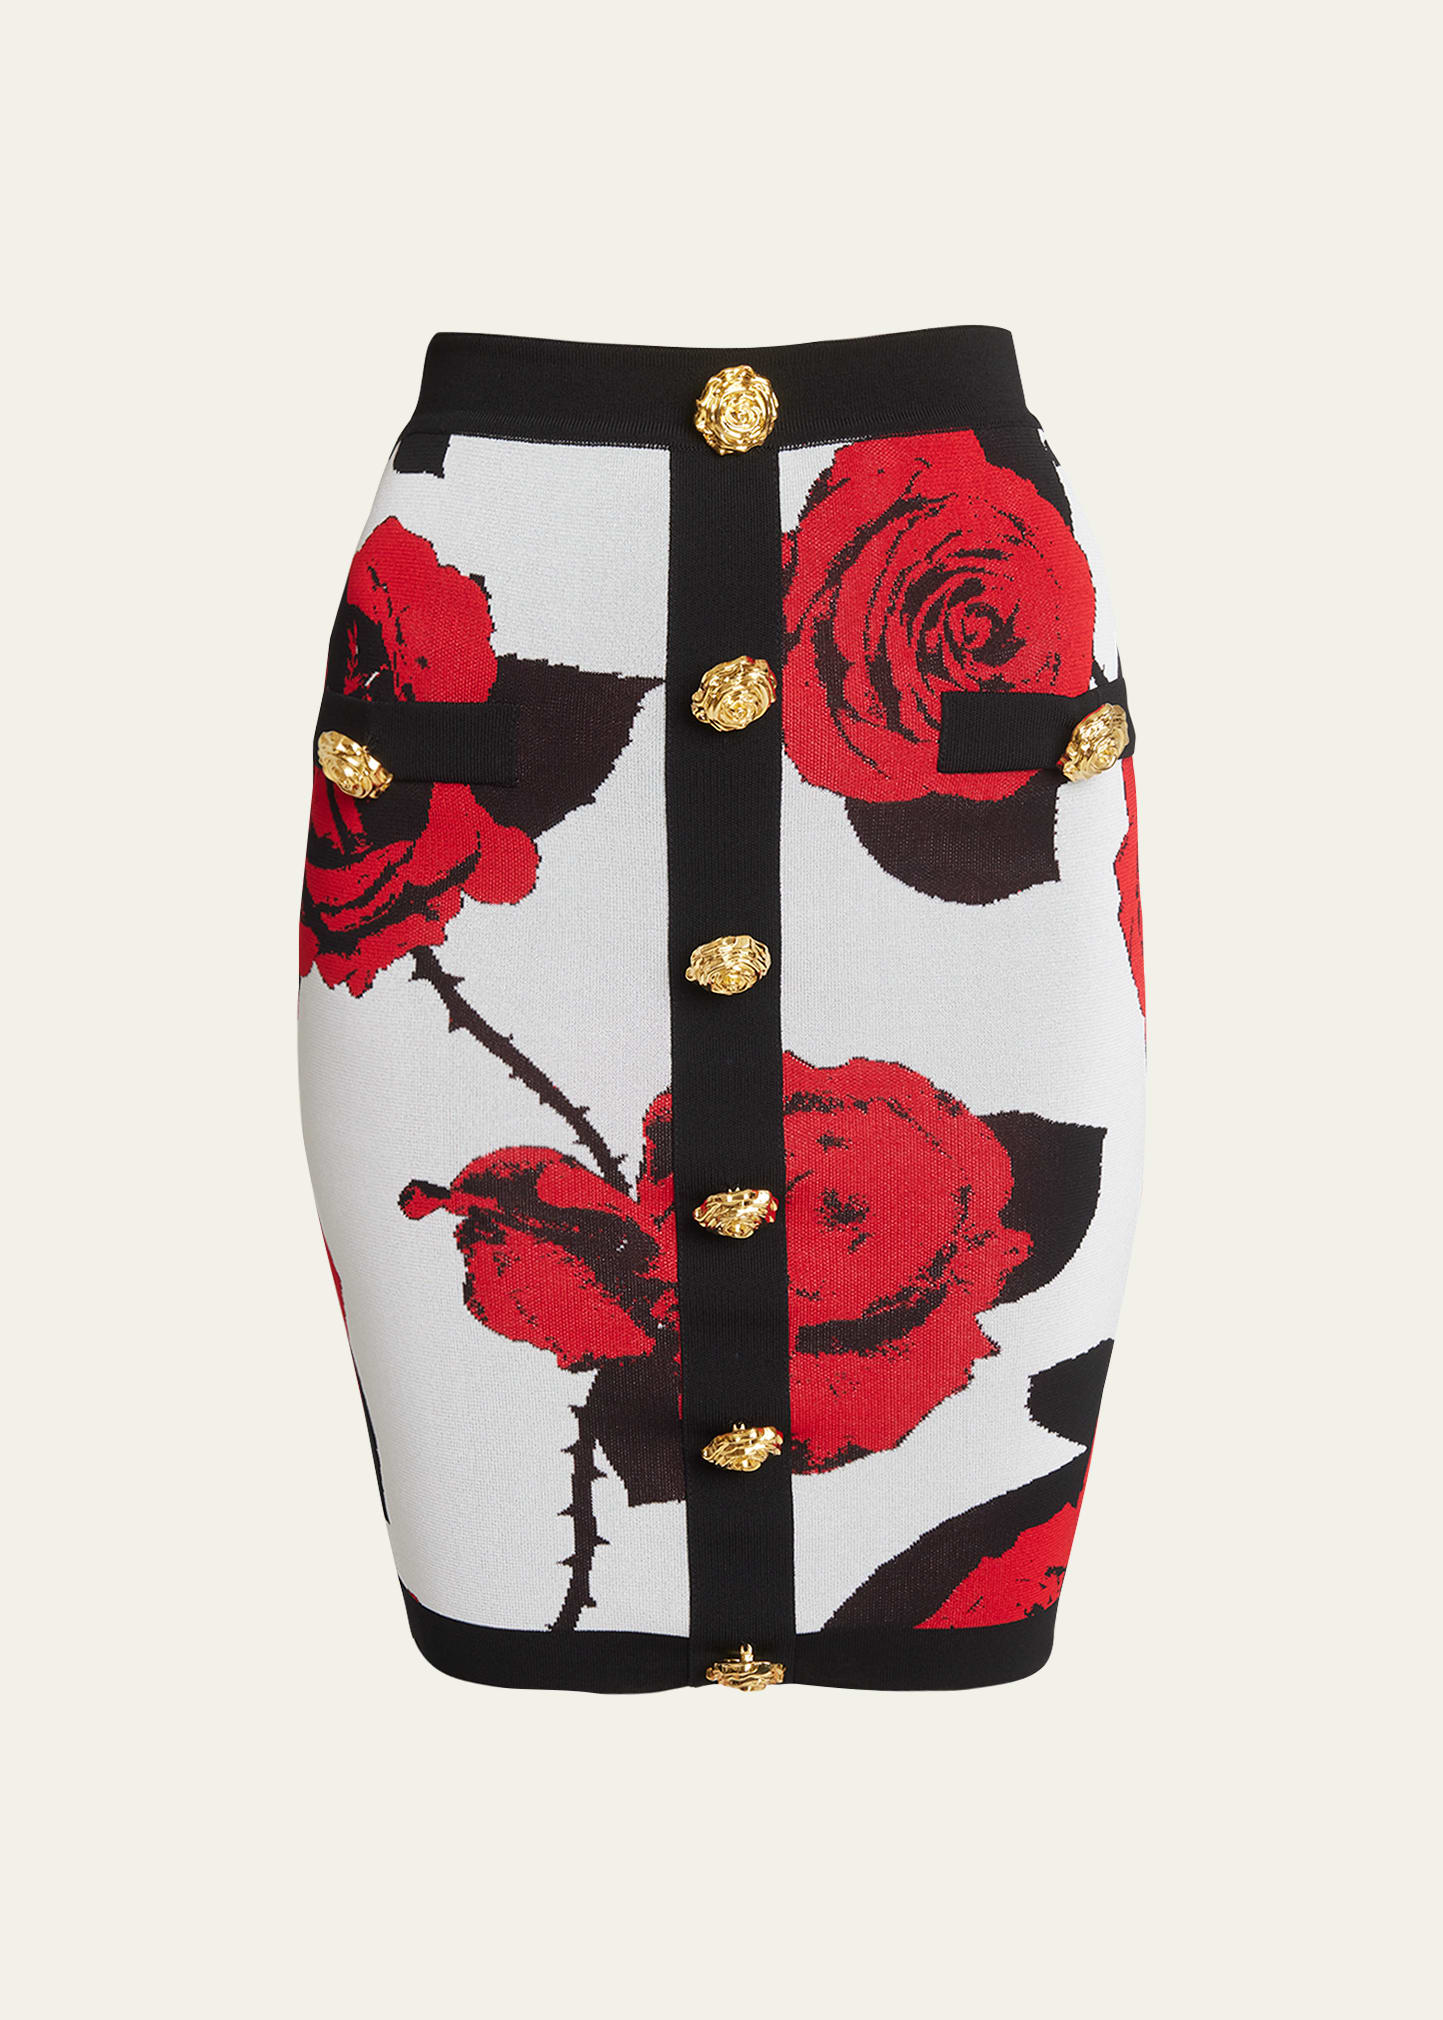 Balmain Rose Print Knit Pencil Skirt With Button Detail In White Black Red